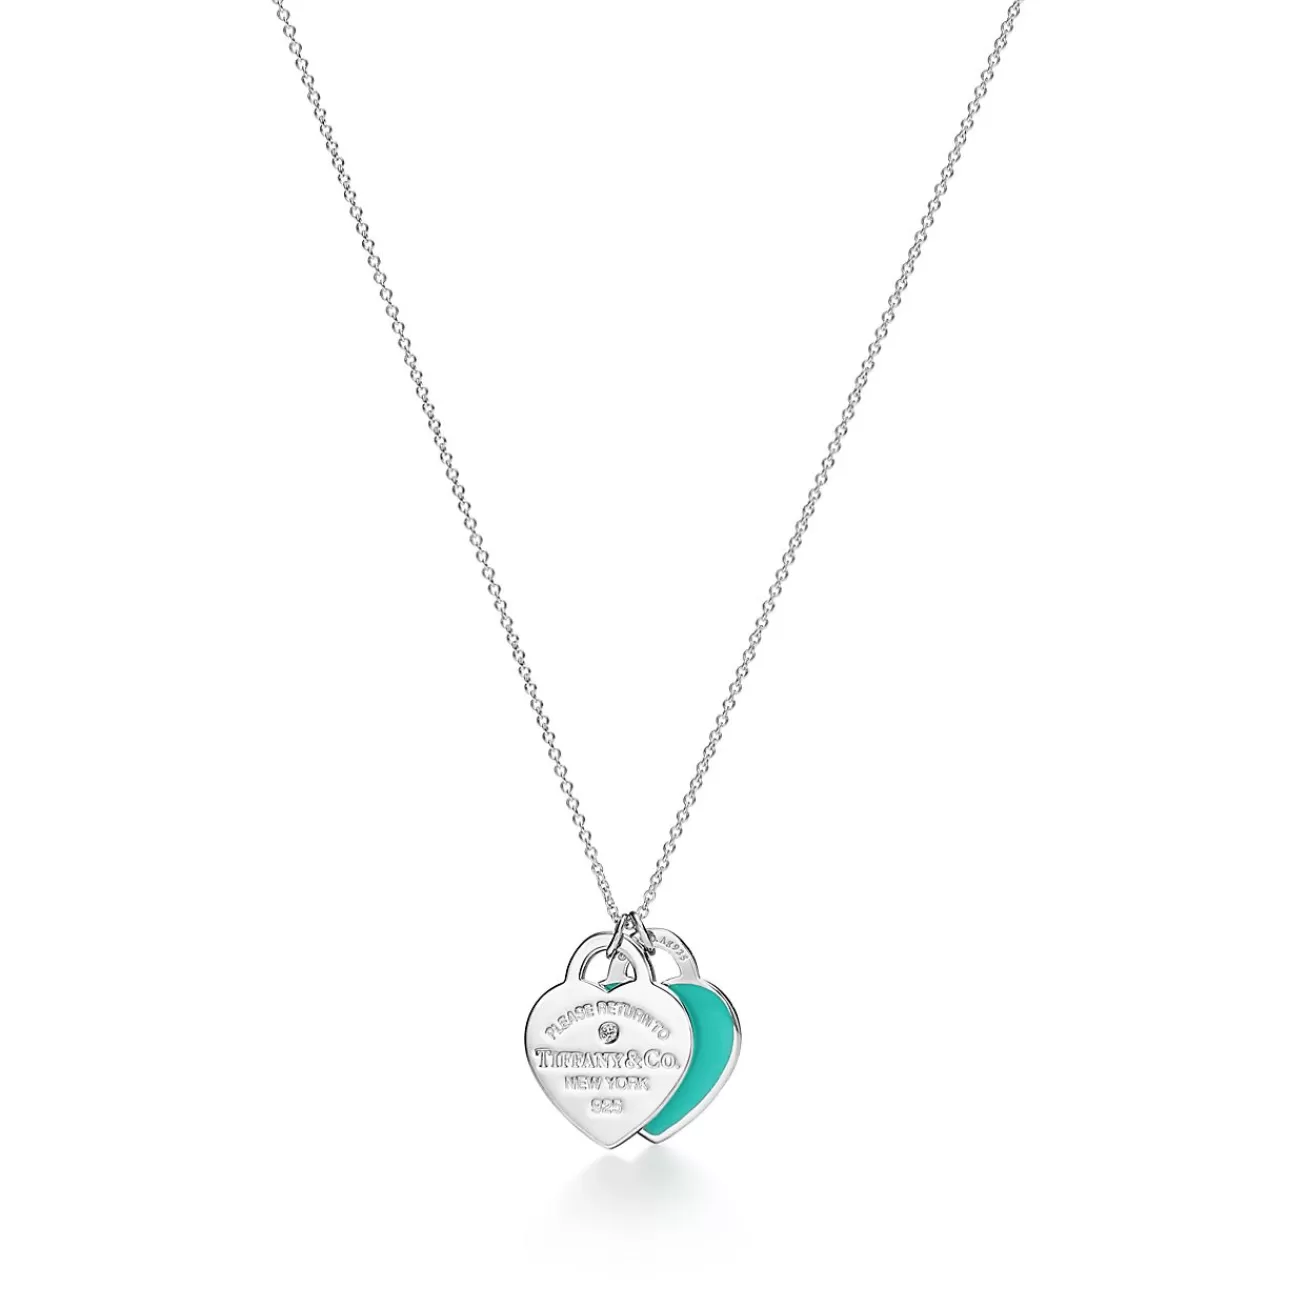 Tiffany & Co. Return to Tiffany® Blue Double Heart Tag Pendant in Silver with a Diamond, Small | ^ Necklaces & Pendants | Gifts for Her